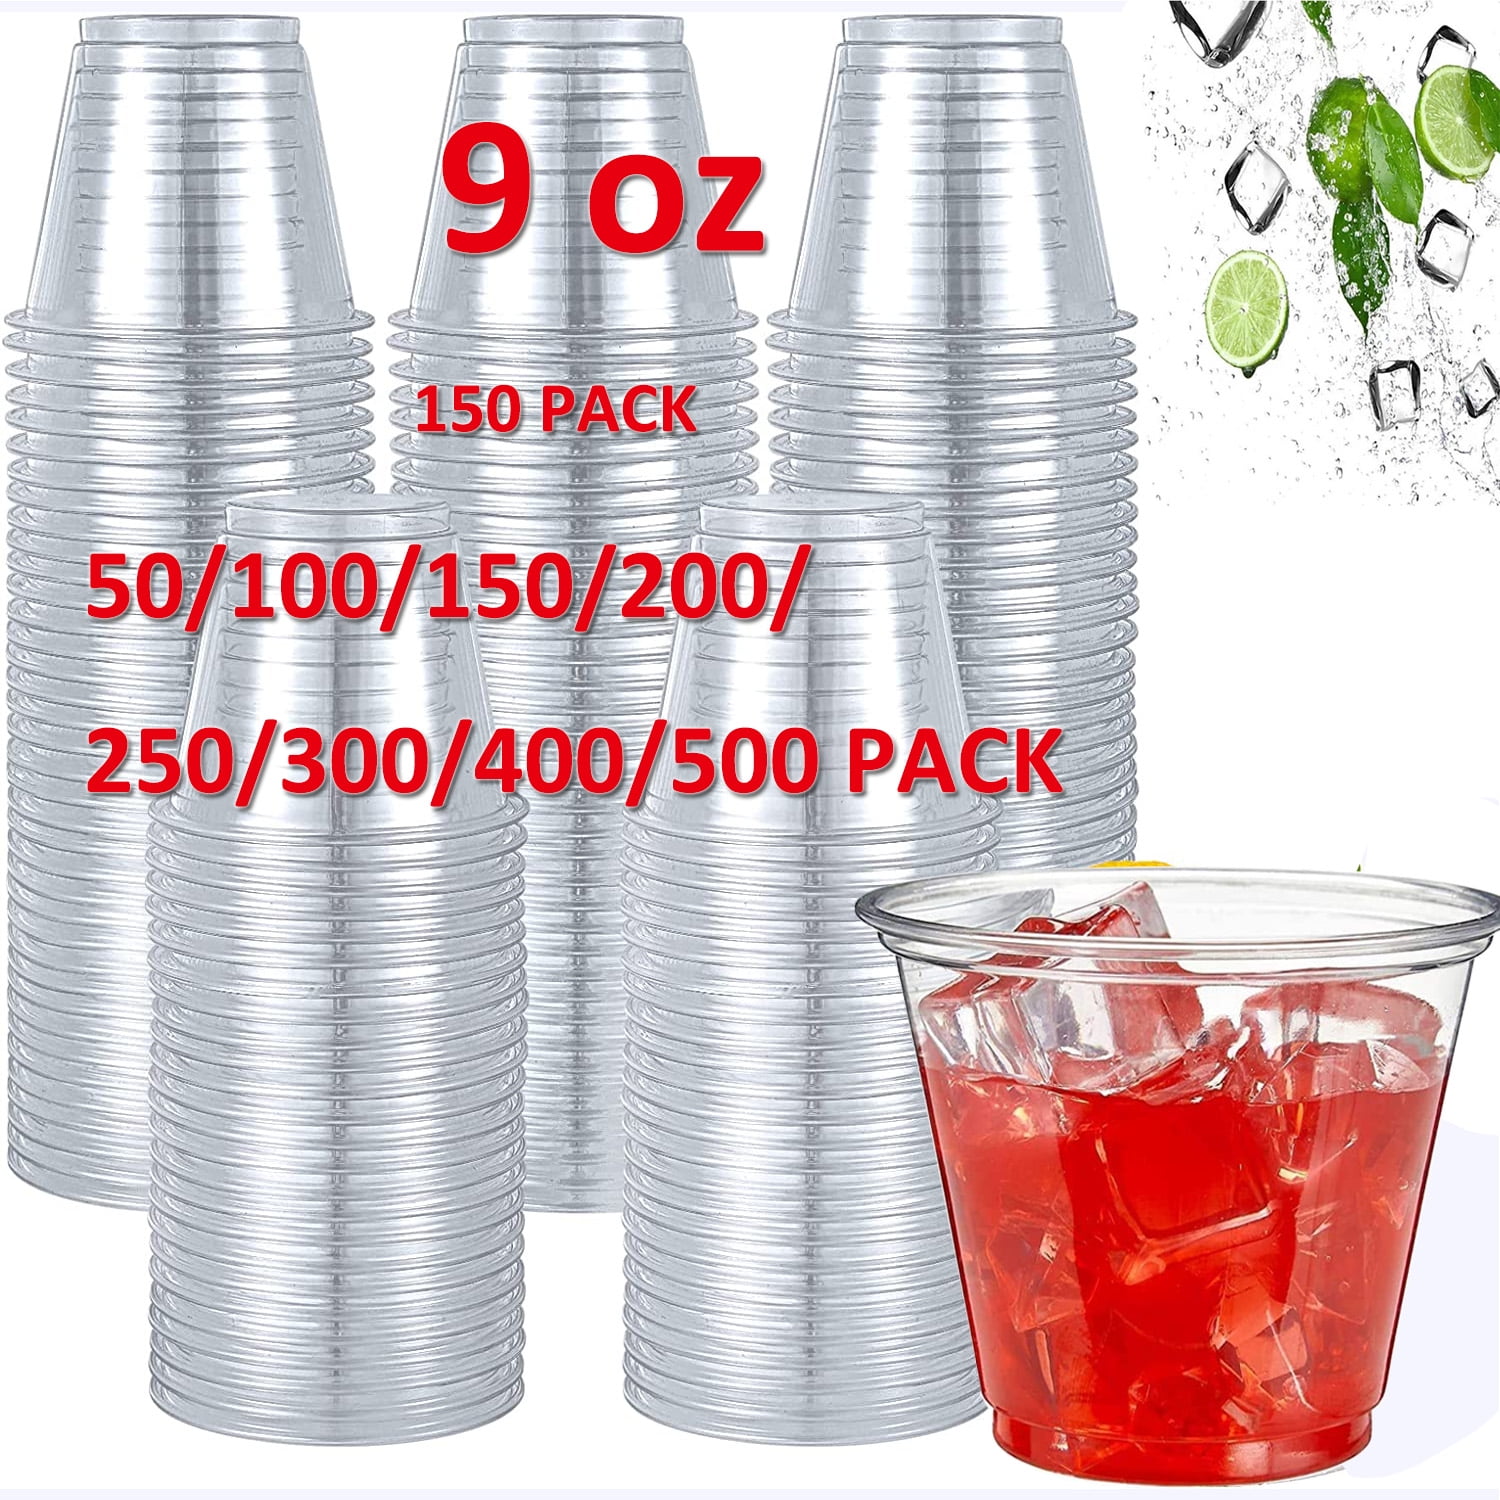 500 Pack - 9 oz.] Clear Disposable Plastic Cups - Cold Party Drinking Cups